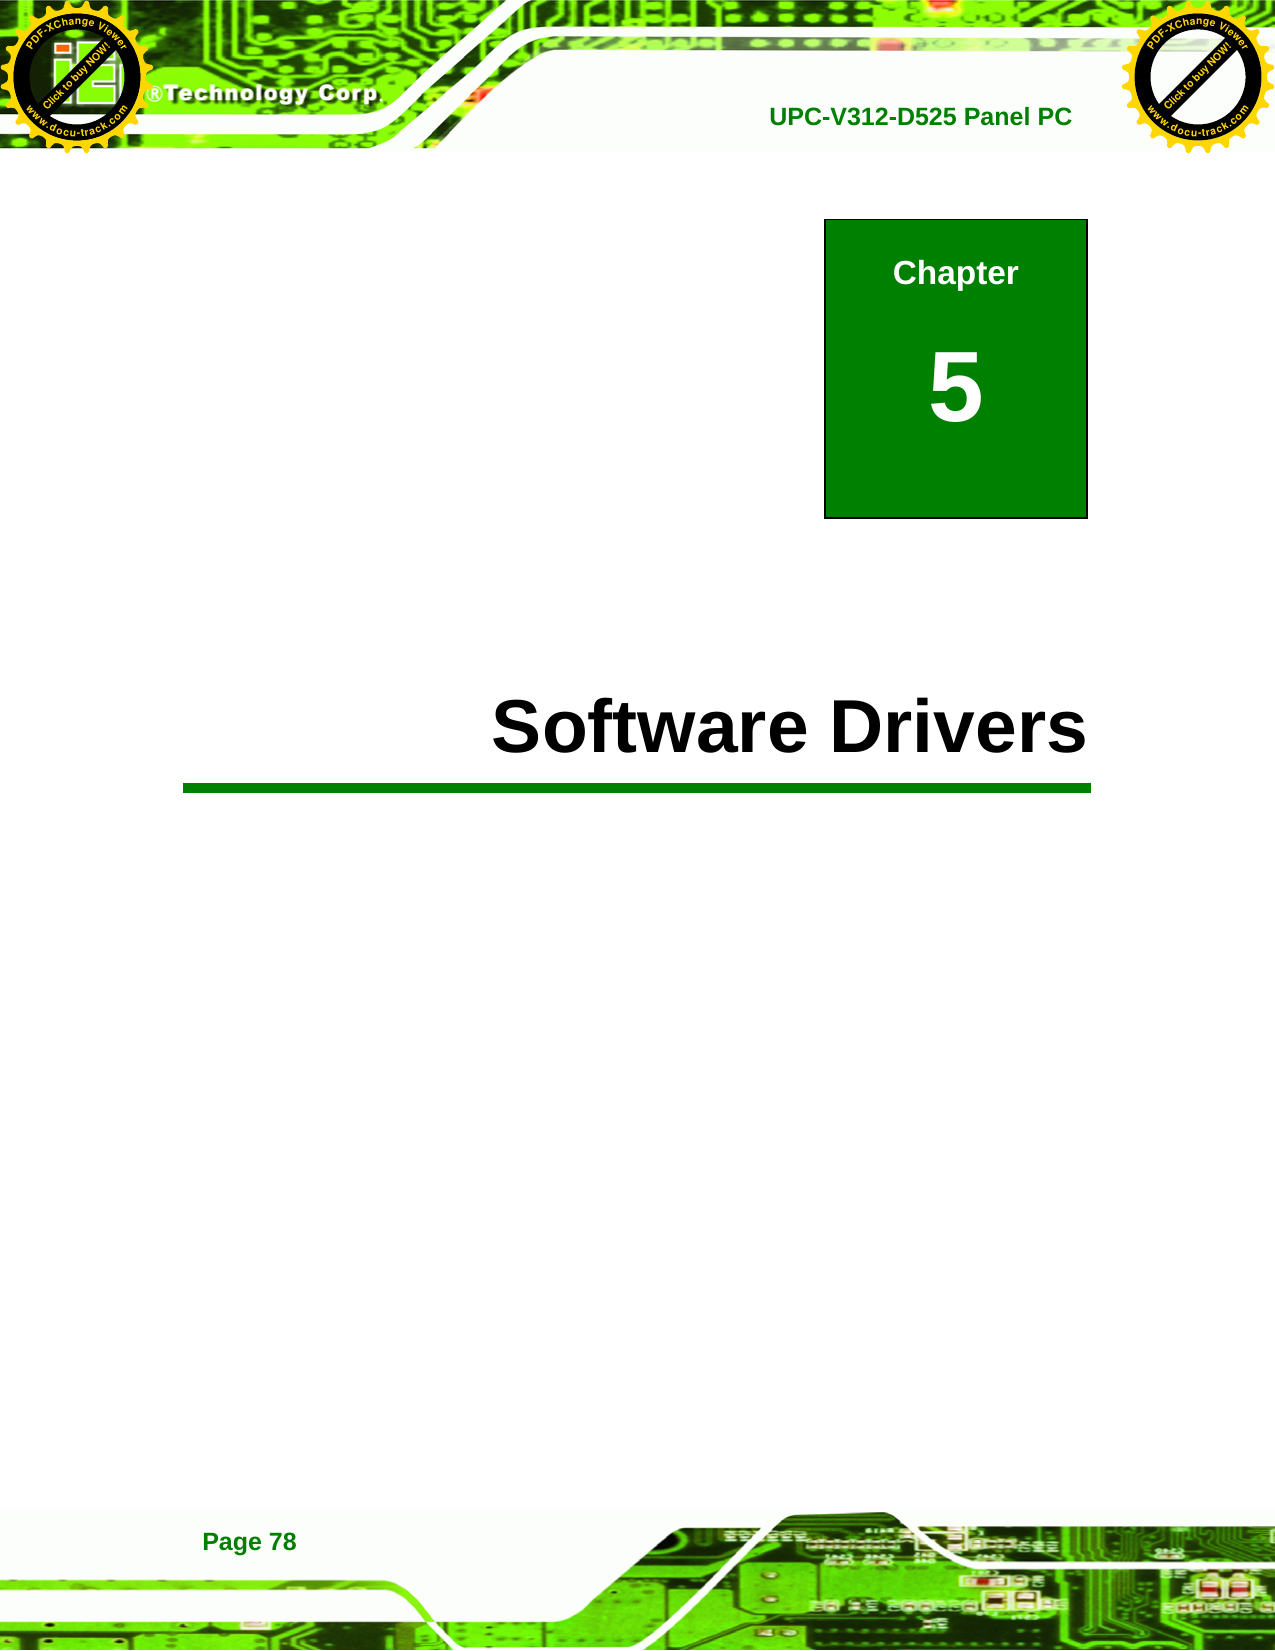   UPC-V312-D525 Panel PCPage 78             5 Software Drivers Chapter 5 Click to buy NOW!PDF-XChange Viewerwww.docu-track.comClick to buy NOW!PDF-XChange Viewerwww.docu-track.com